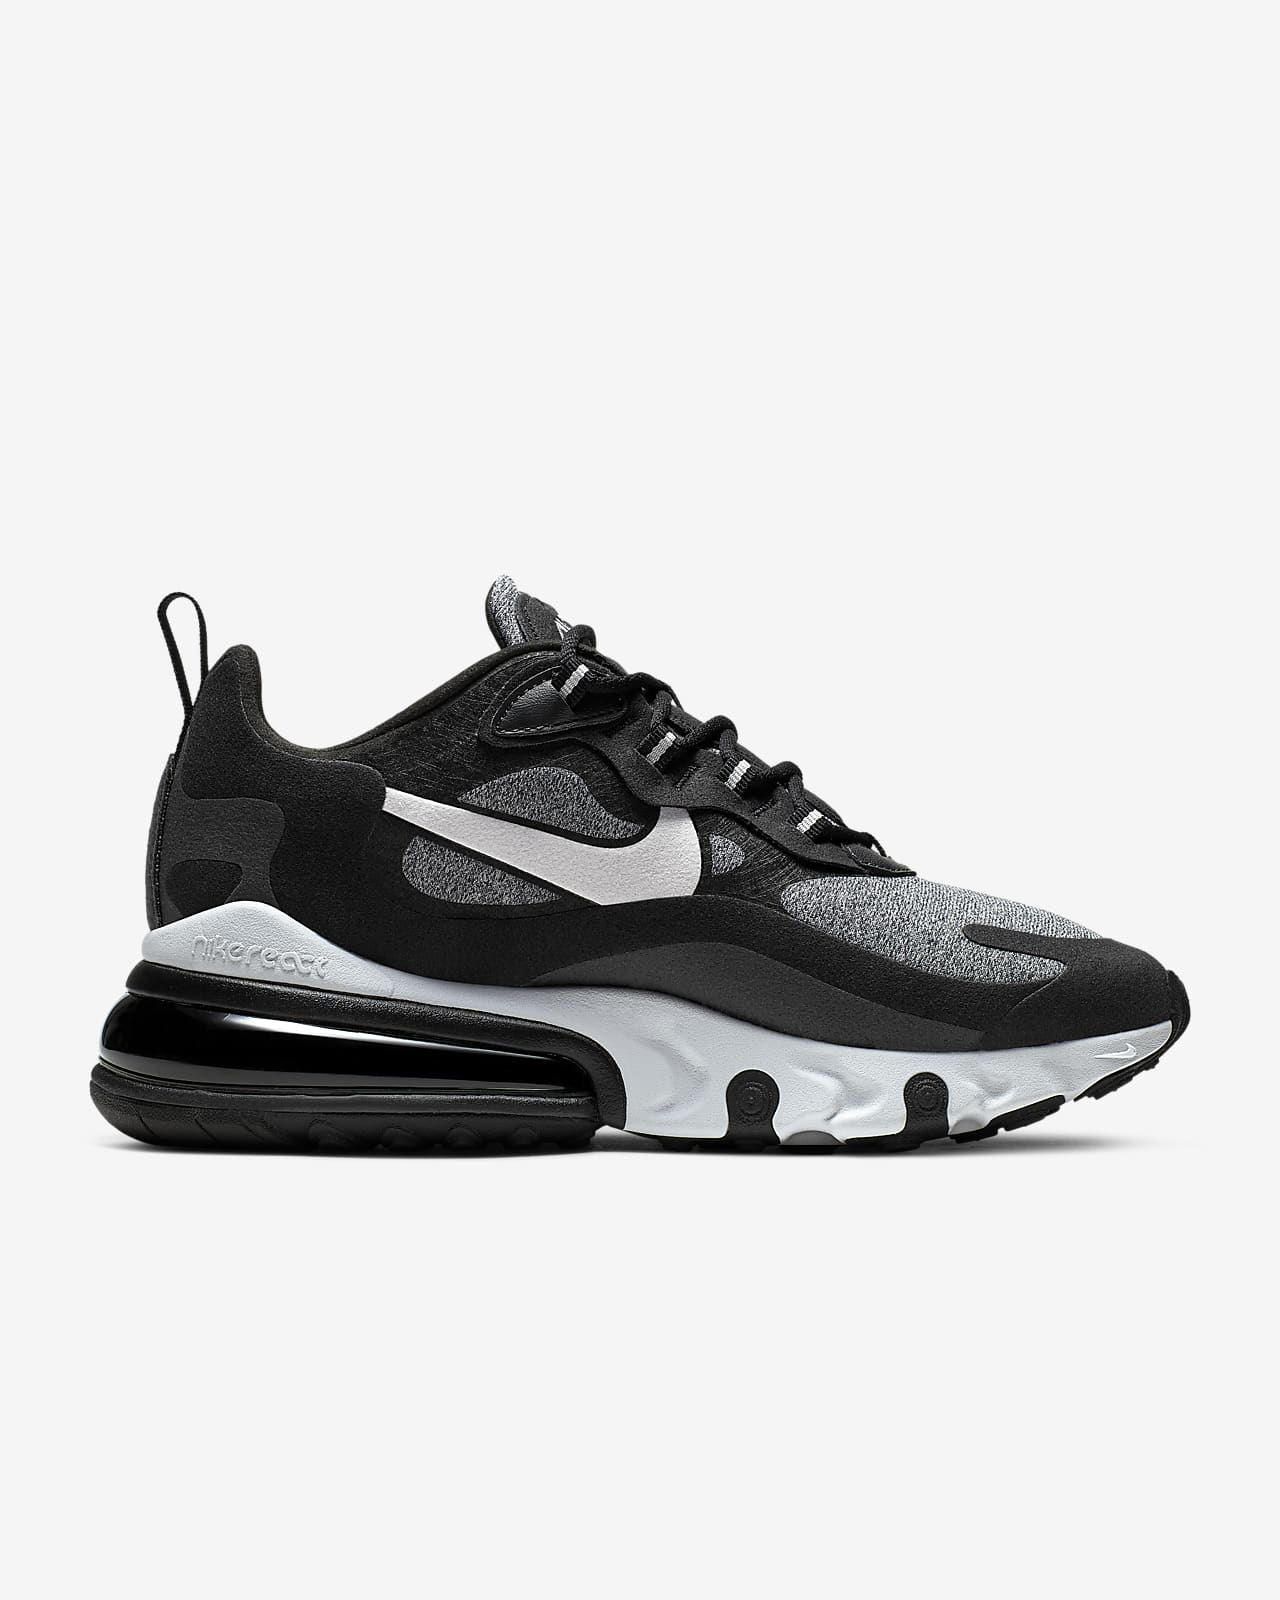 nike air max 270 react trainers in black and grey